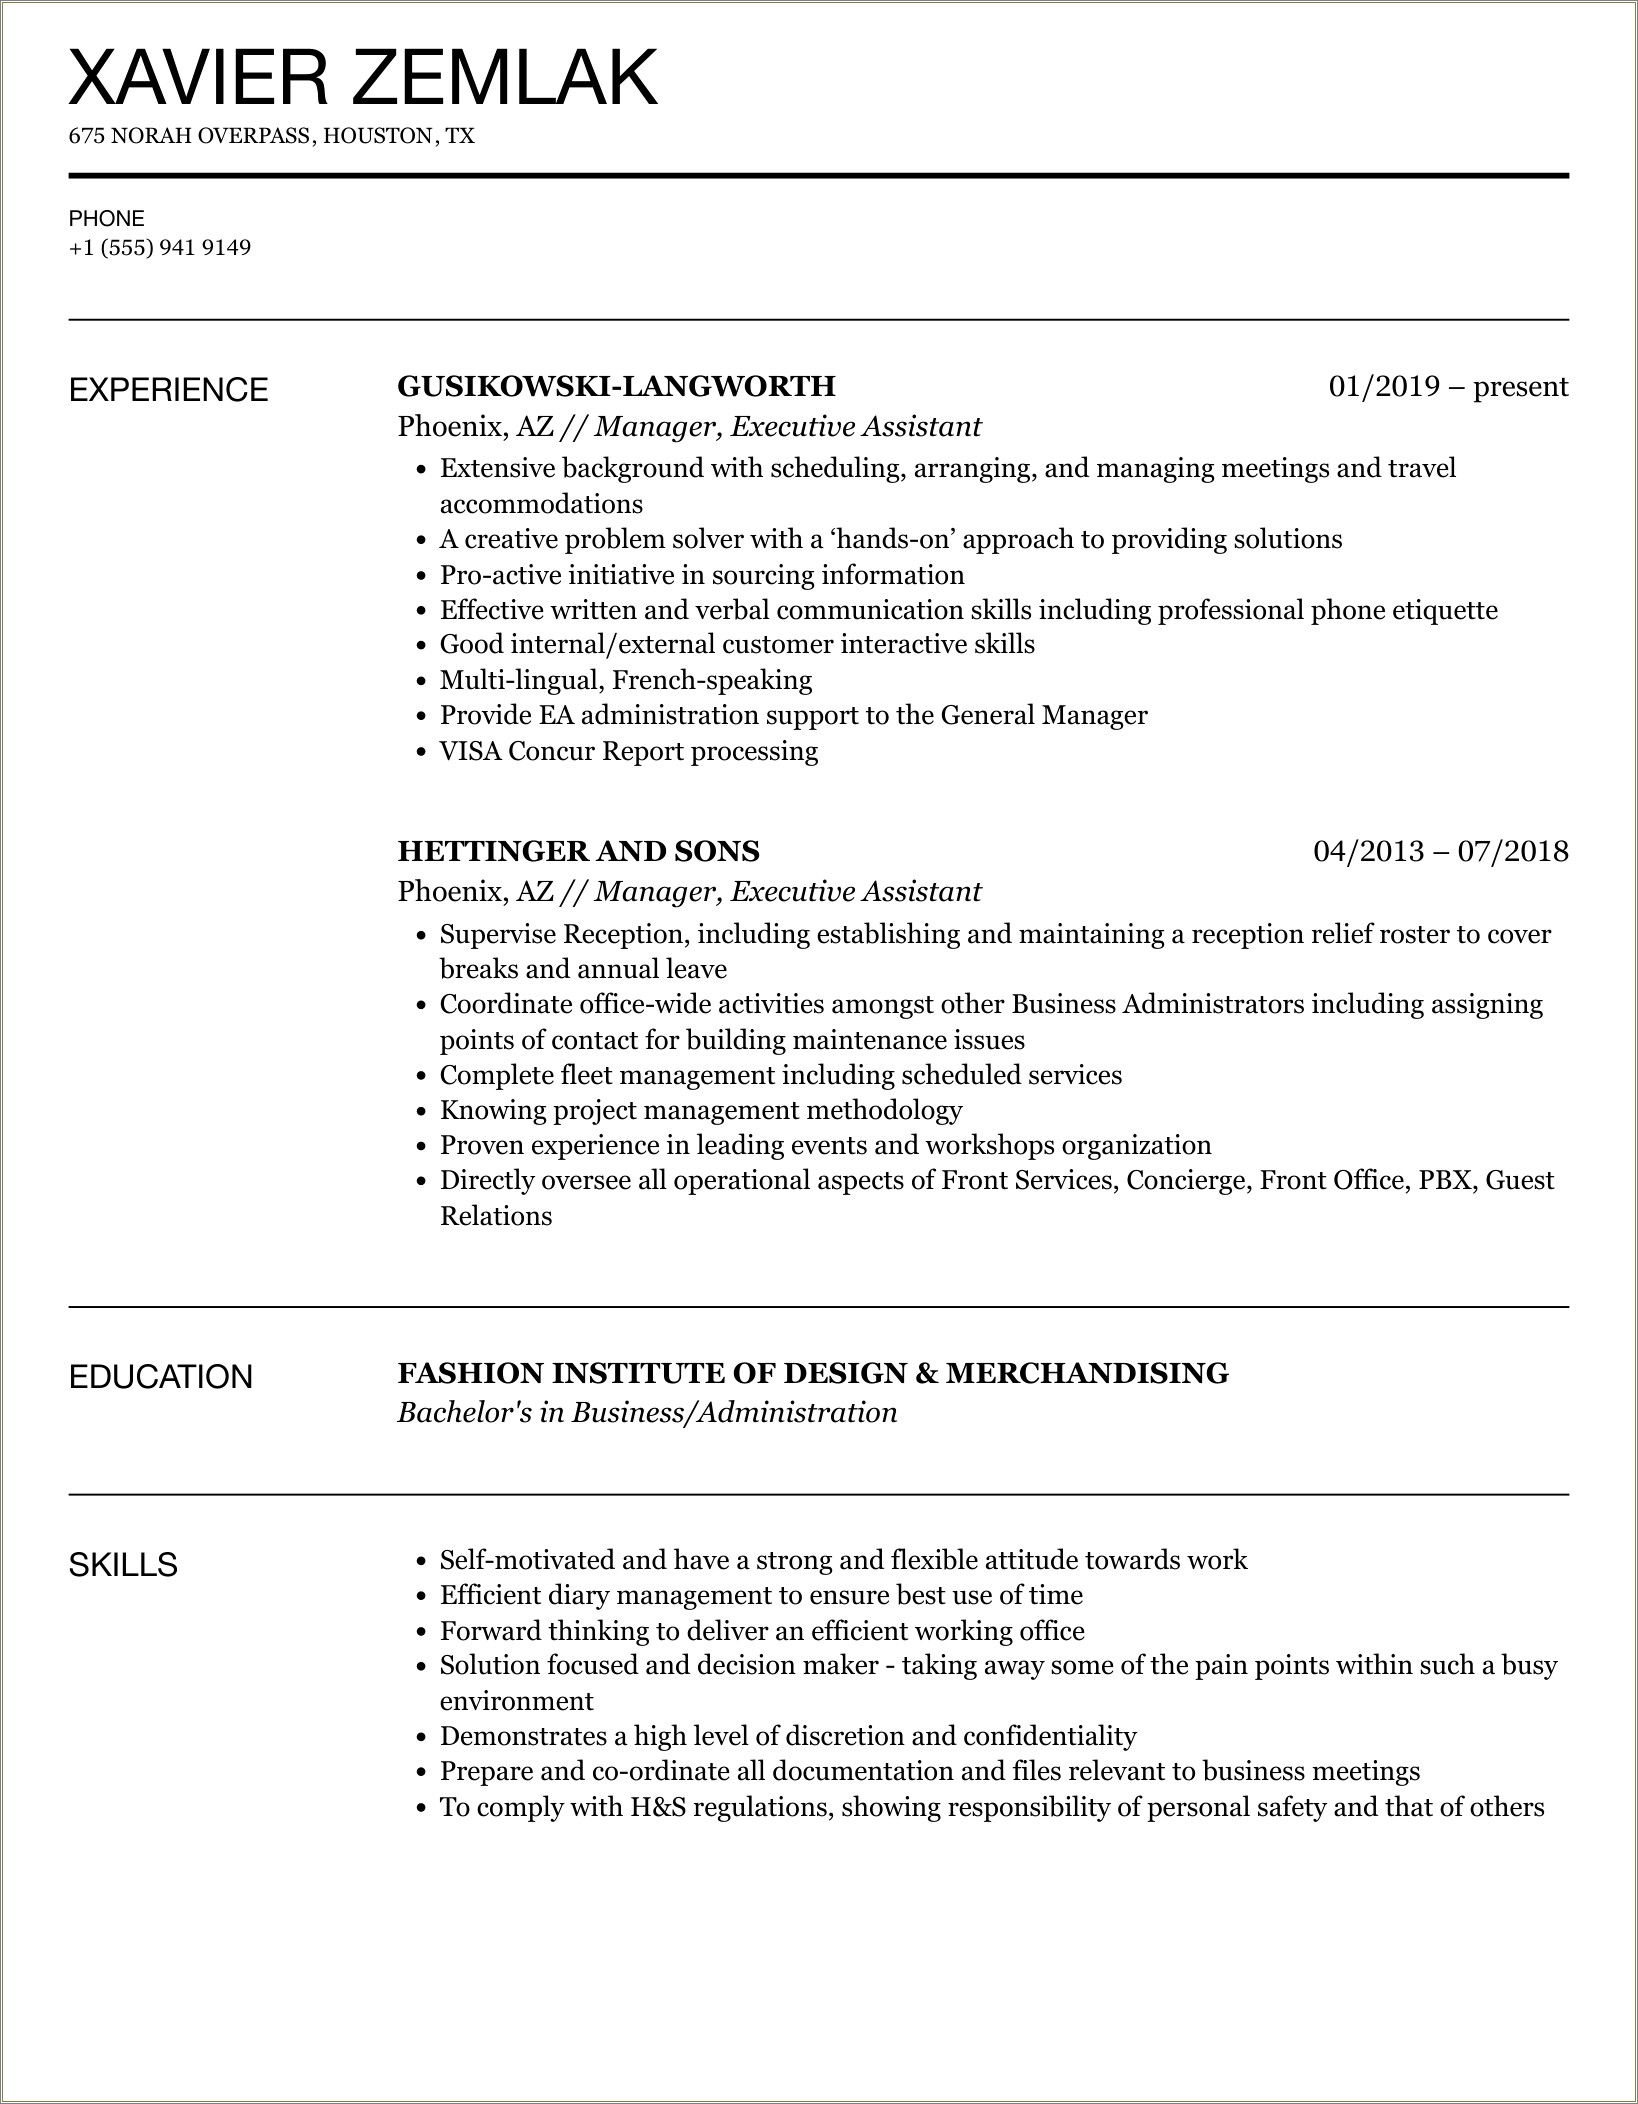 Executive Assistant To Managing Director Resume